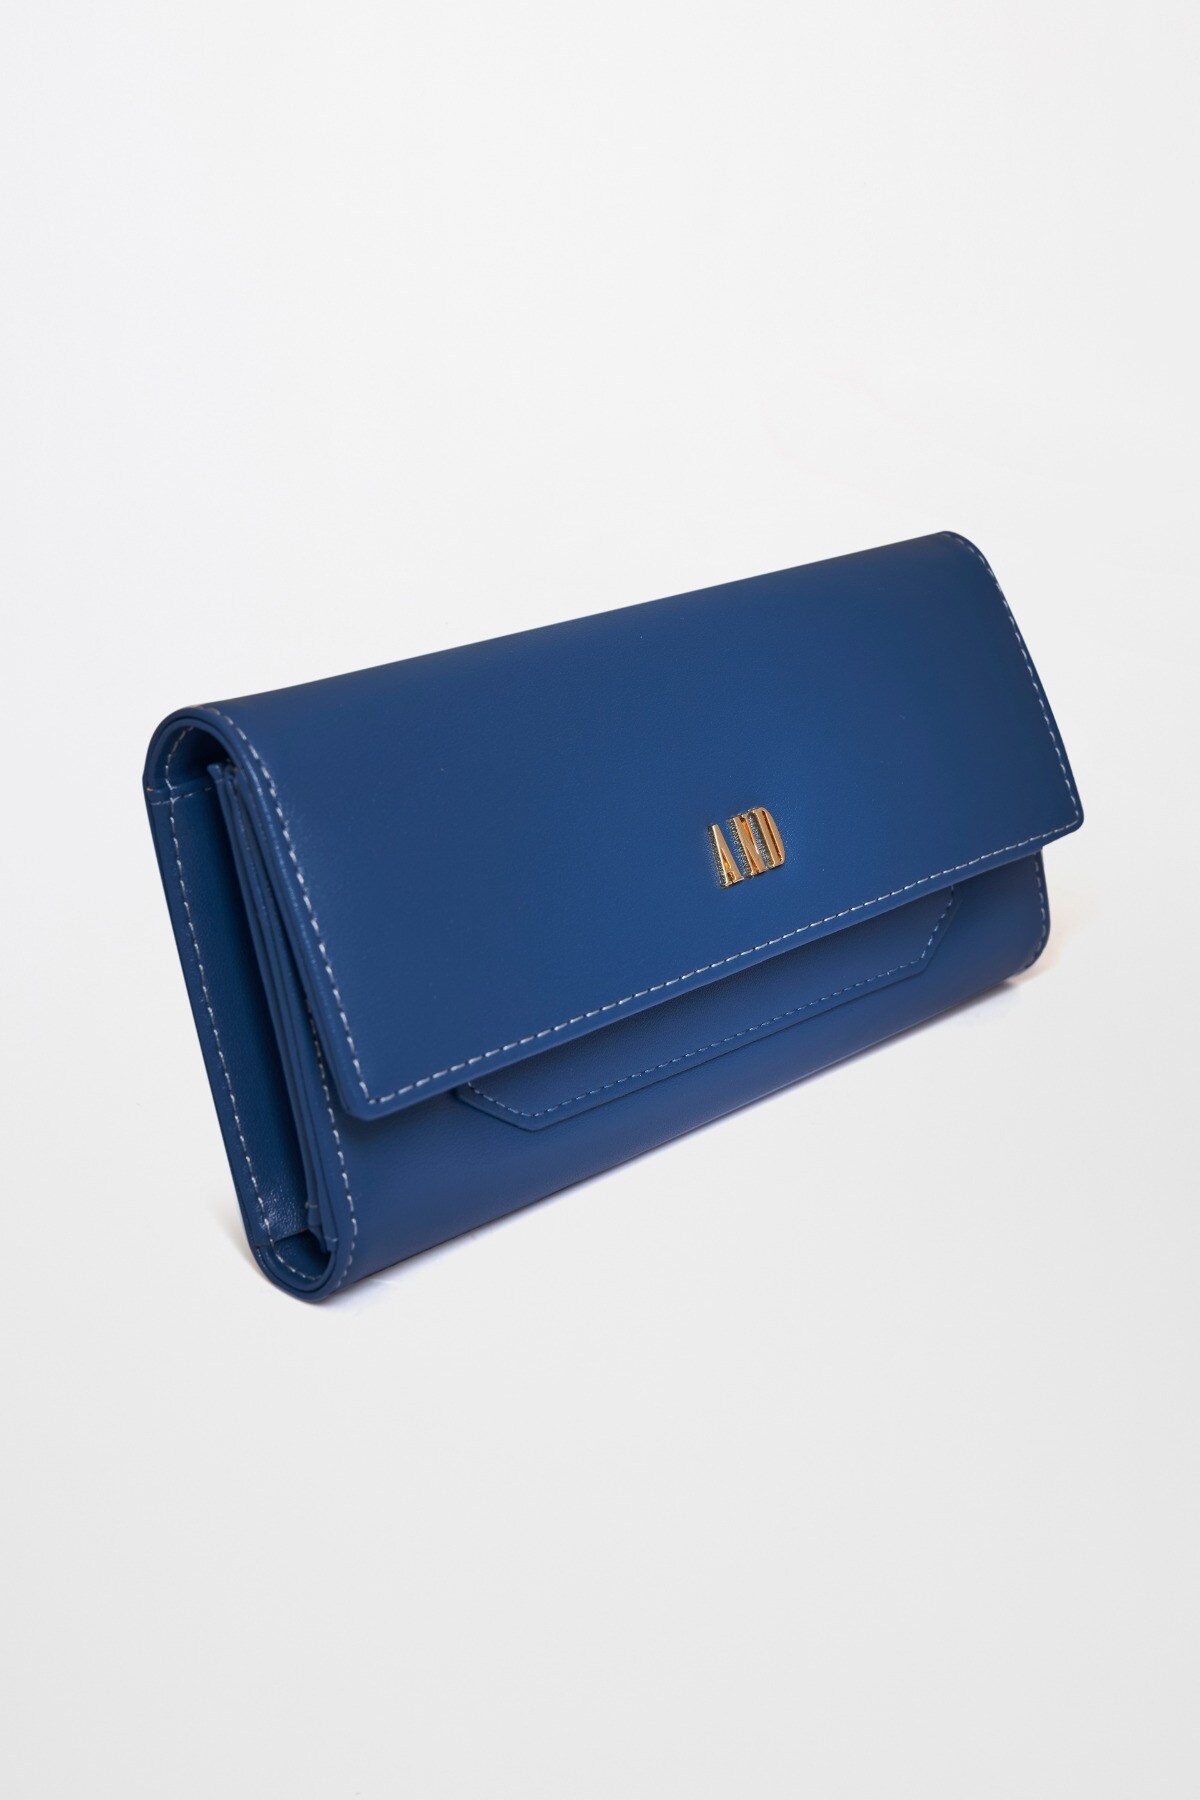 AND | Teal Wallet 1